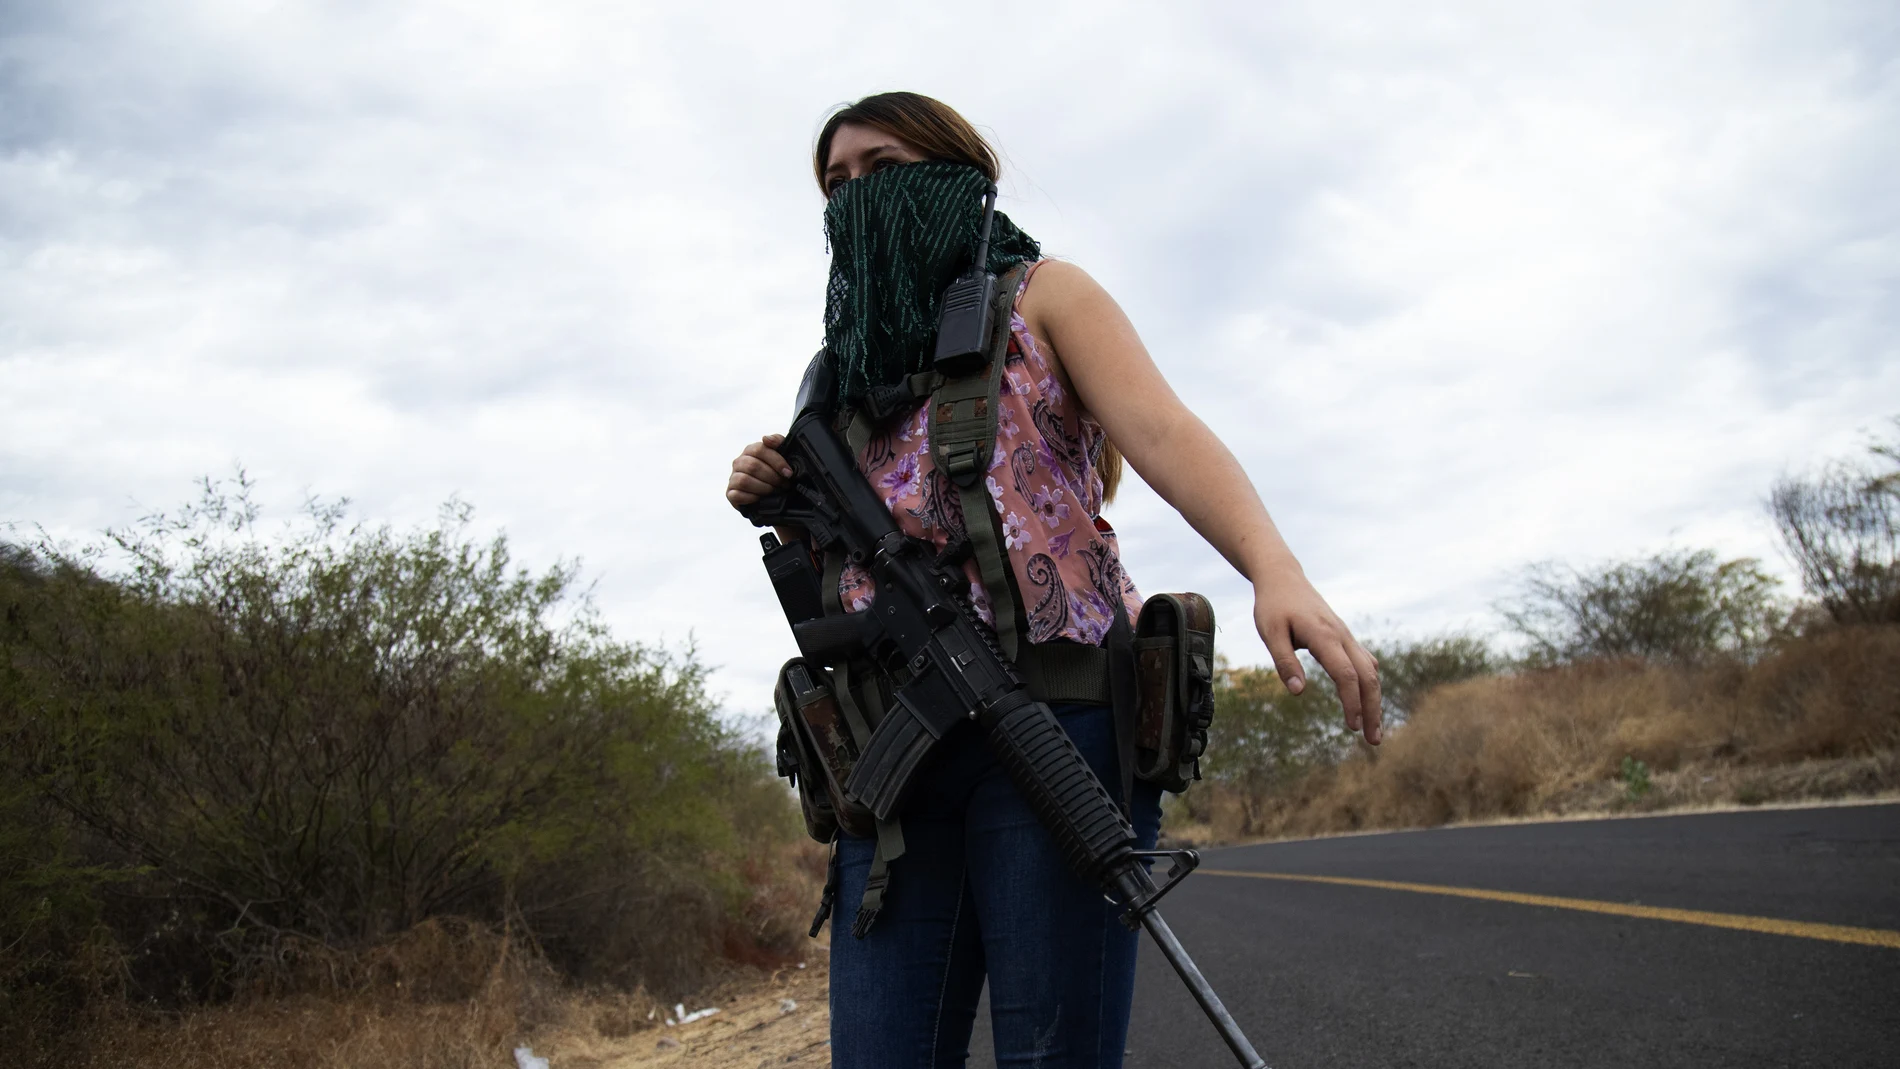 An armed woman who goes by the nickname "La Guera," and who says she is a member of a female-led, self-defense group, patrols the edge of her town El Terrero, where it shares a border with the town of Aguililla, in Michoacan state, Mexico, Thursday, Jan. 14, 2021. In other towns nearby, residents have dug trenches across roadways leading into neighboring Jalisco state, to keep attackers out. (AP Photo/Armando Solis)